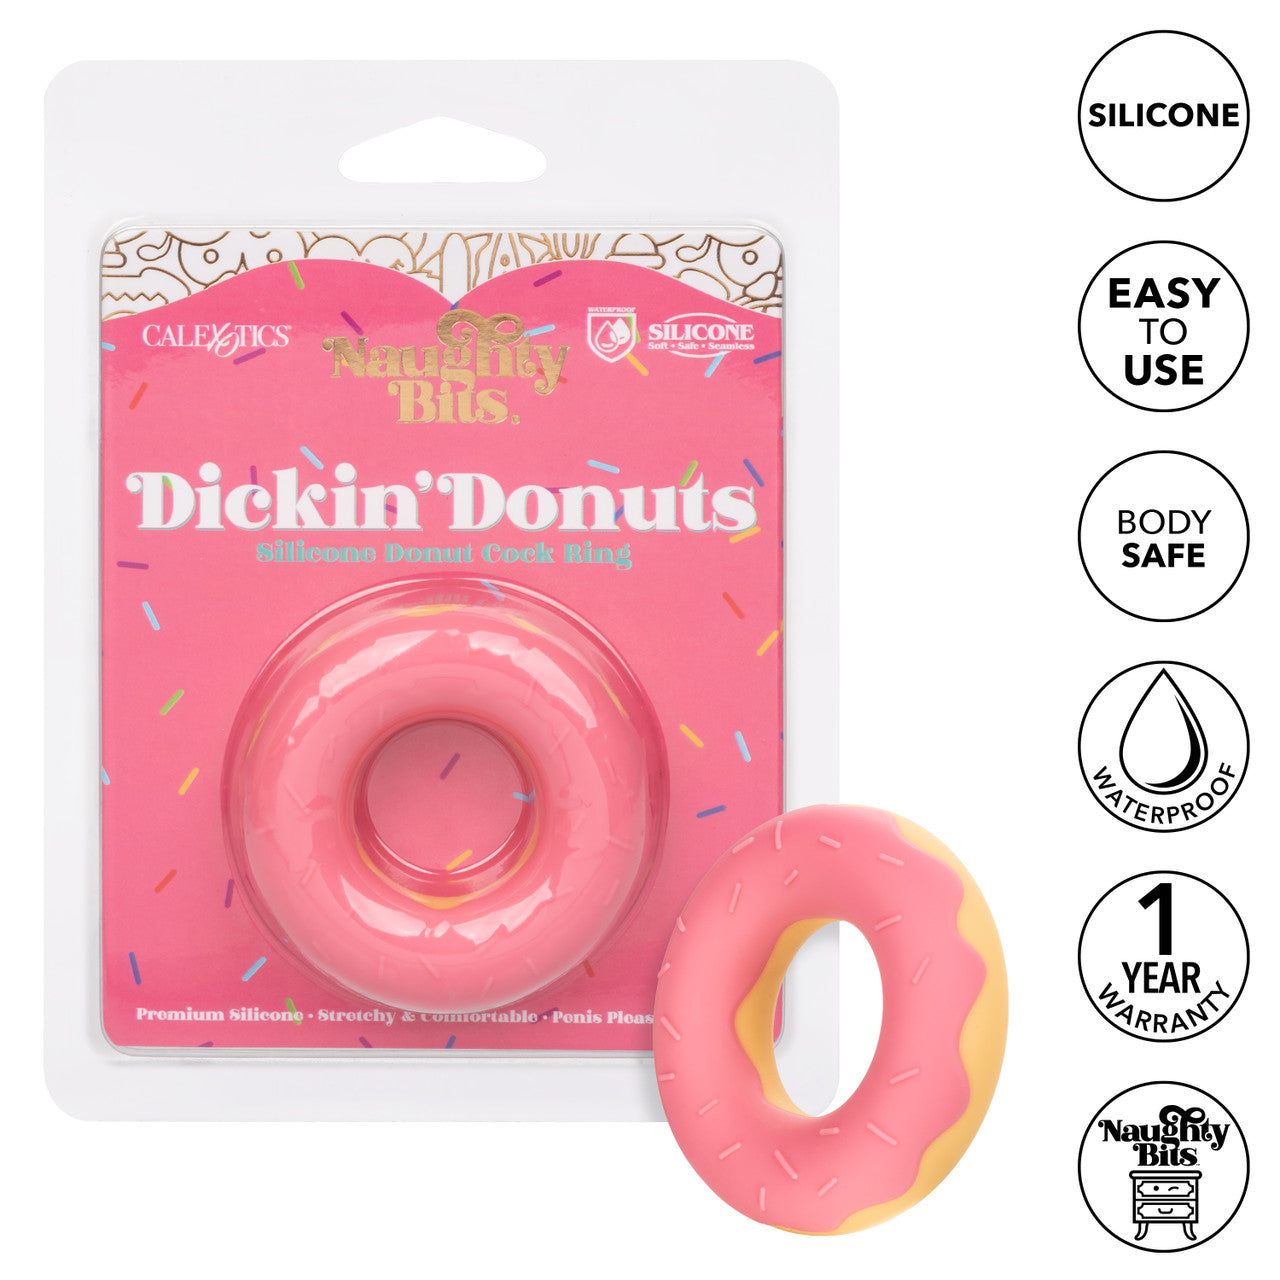 The Dickin Donuts Silicone Cock Ring next to its packaging.